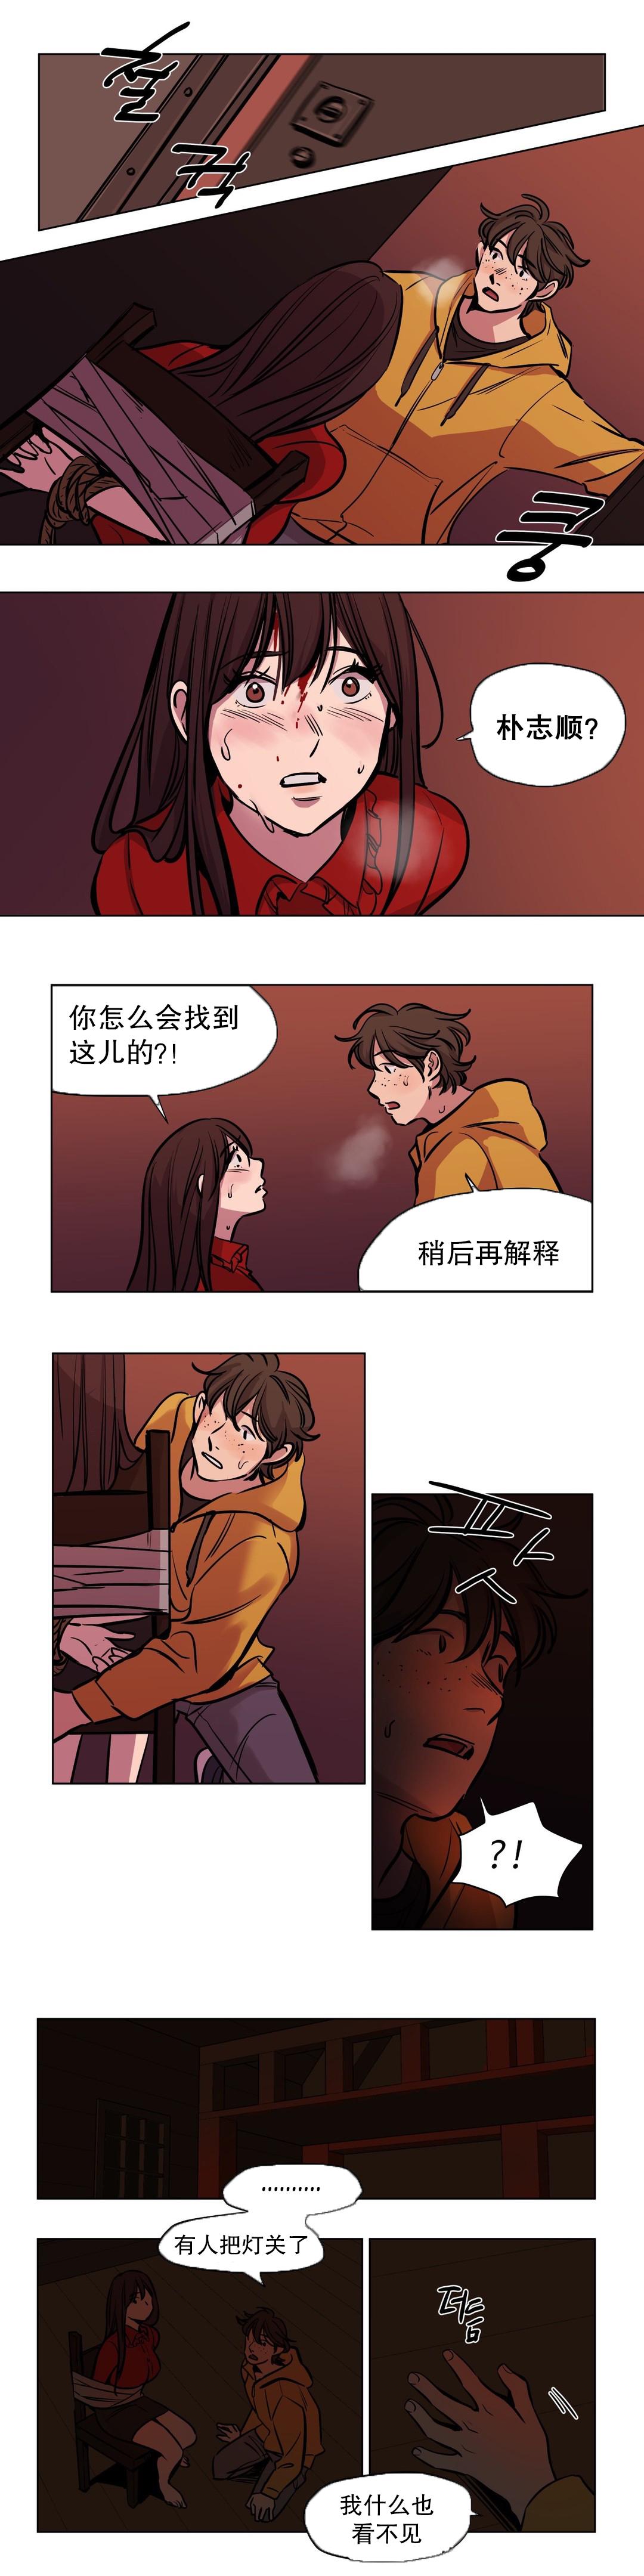 [Ramjak] 赎罪营(Atonement Camp) Ch.50-51 (Chinese) 20